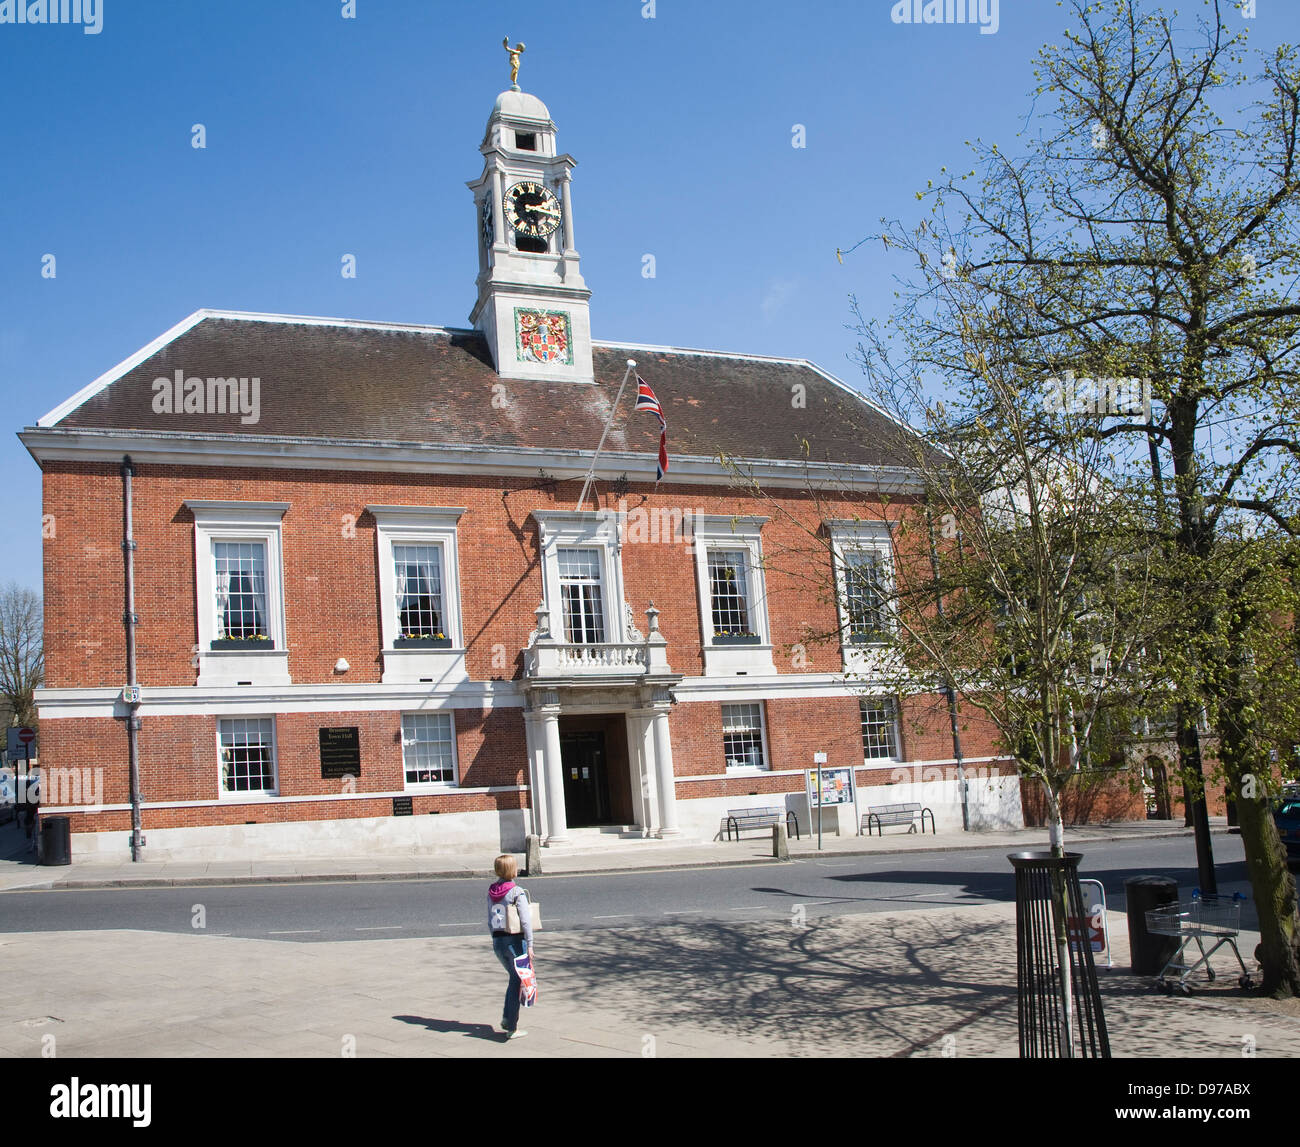 Town Hall Built In 1920s At Braintree Essex England Stock Photo Alamy